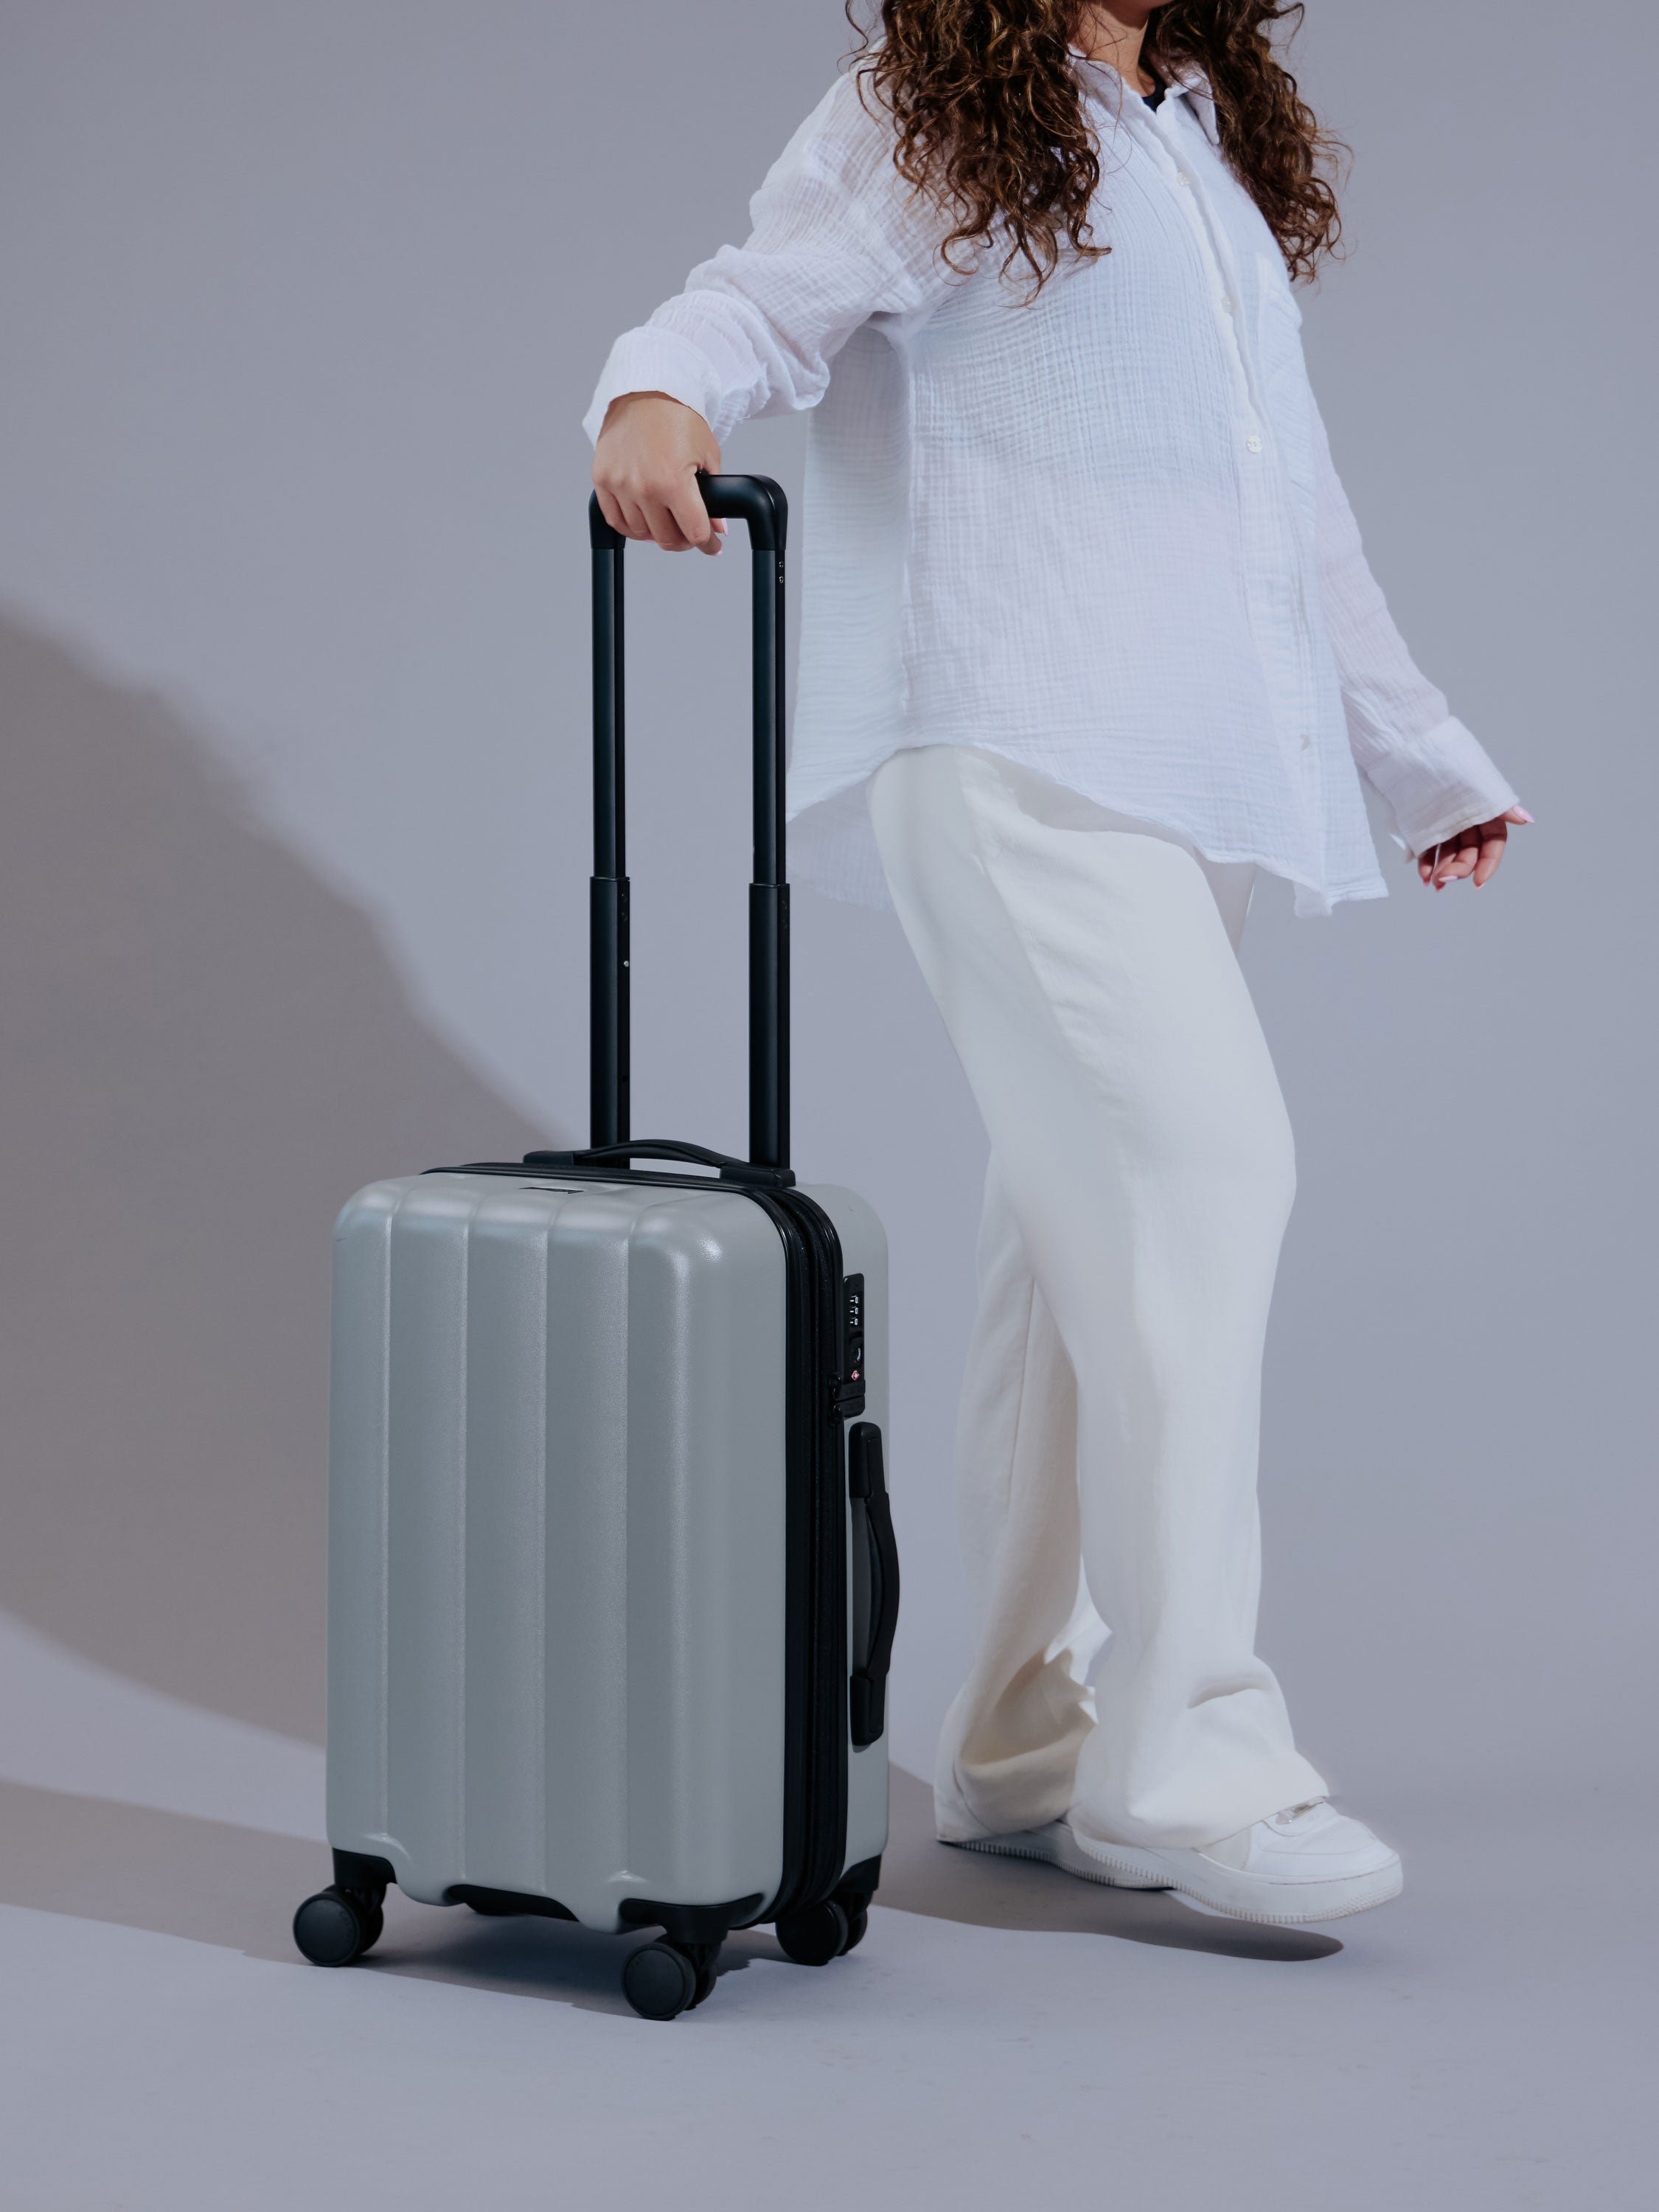 Model rolling smoke gray CALPAK Evry Carry-On Luggage and displaying dual spinner wheels